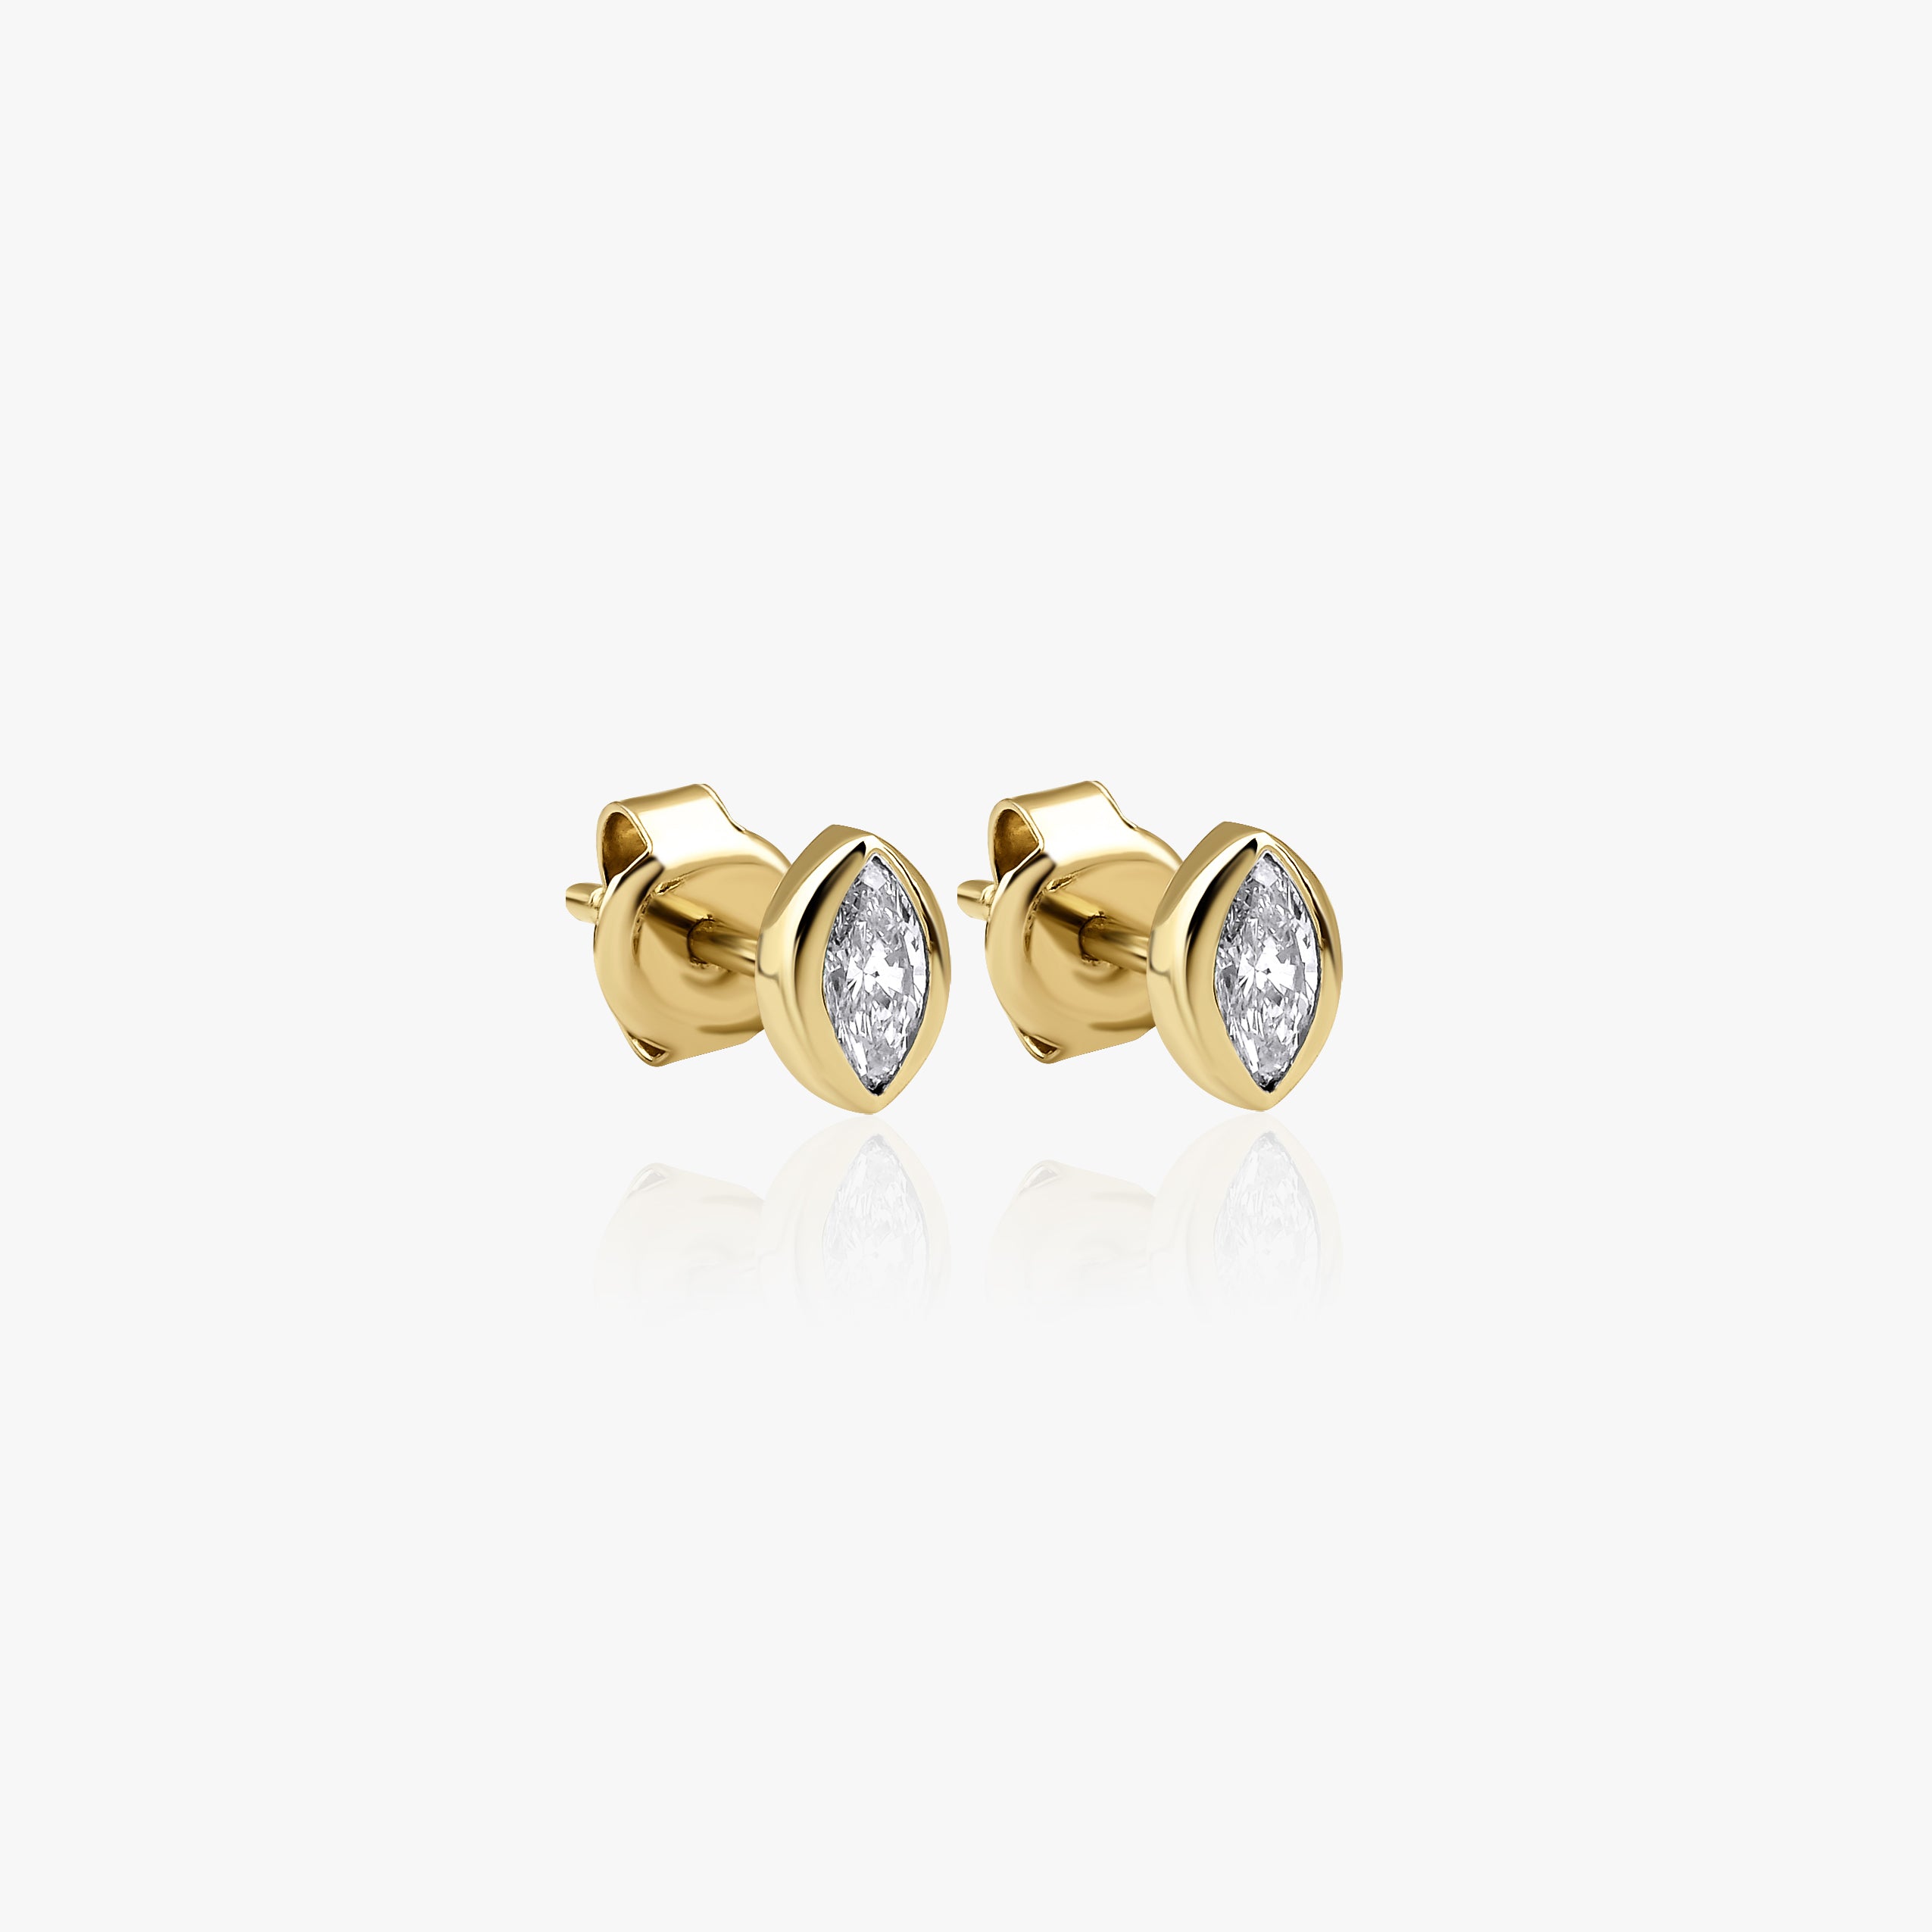 Marquise Diamond Stud Earrings Available in 14K and 18K Gold